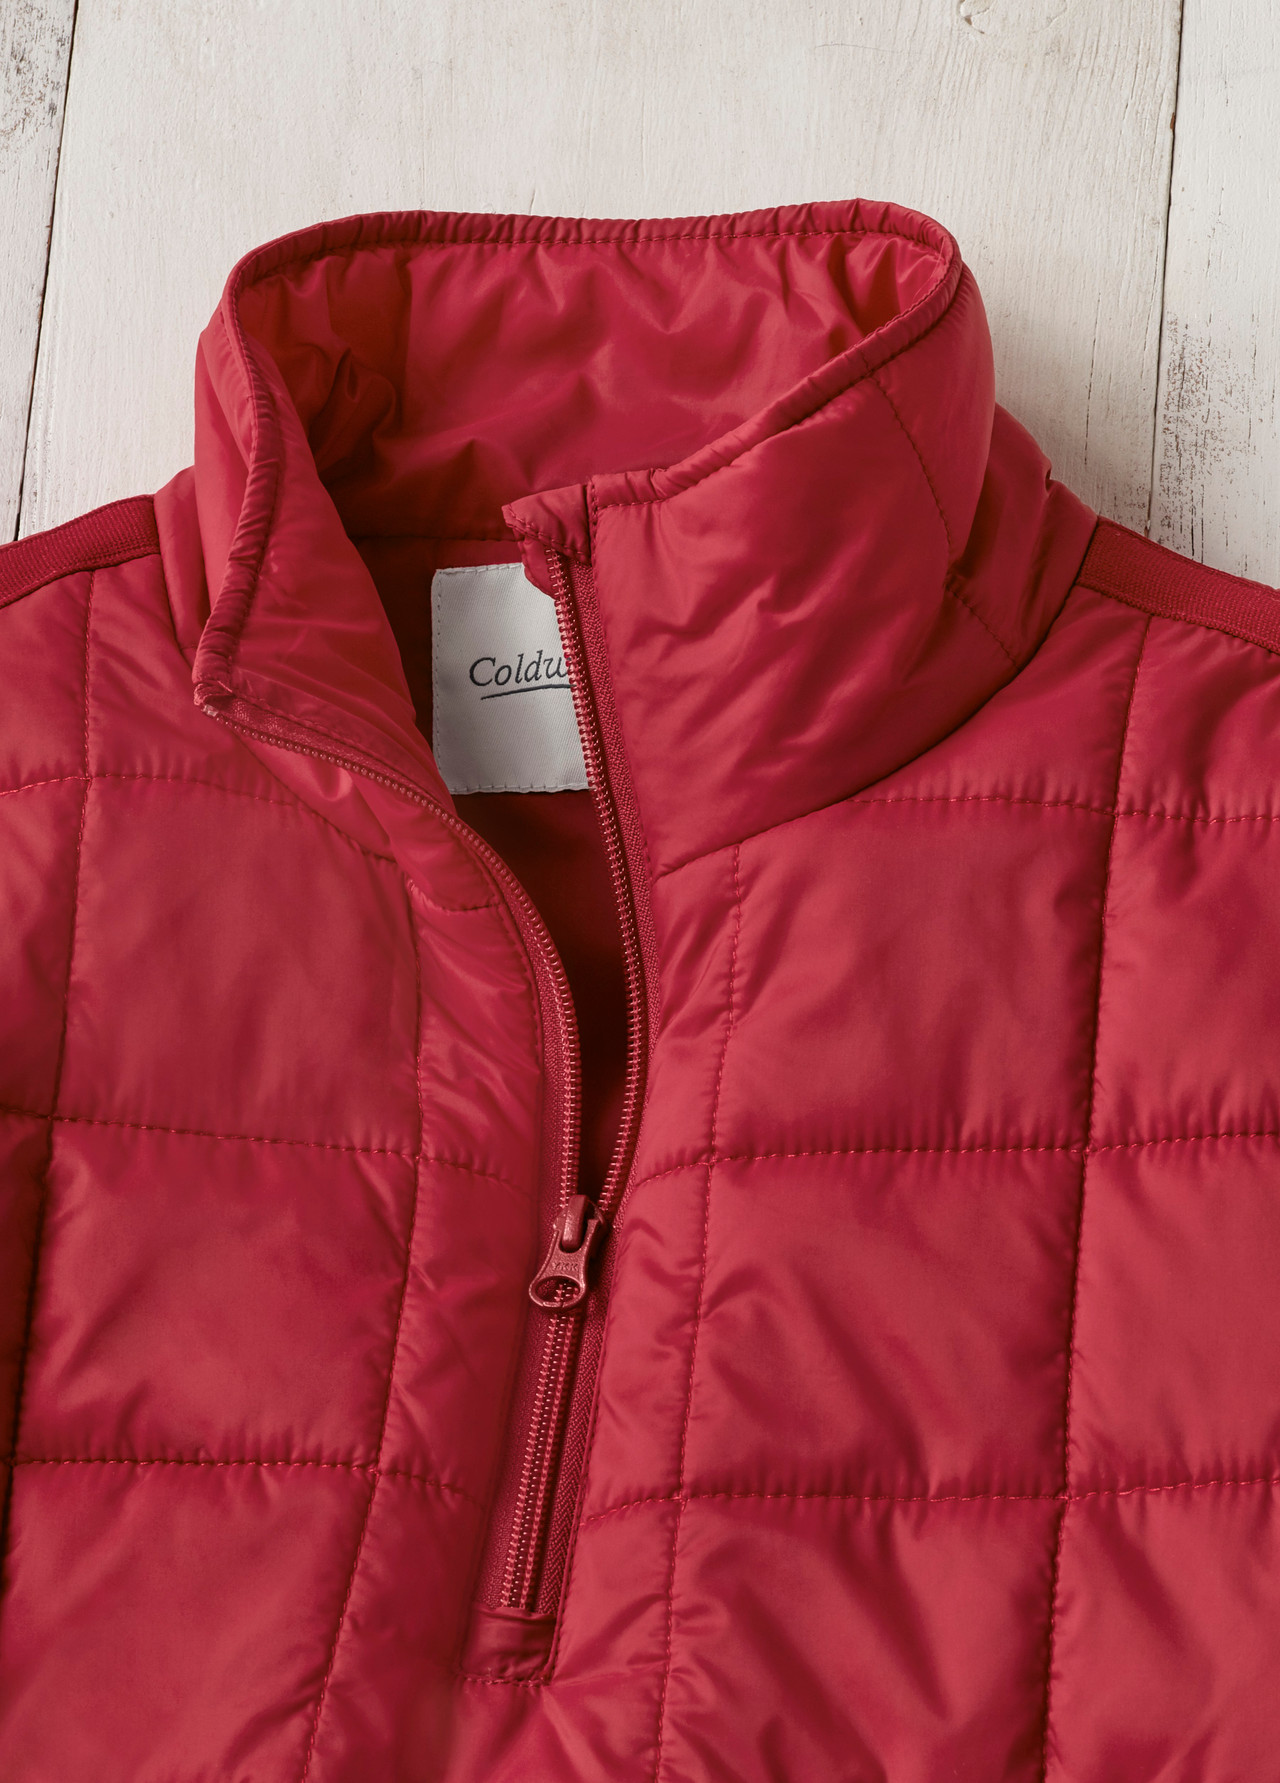 Chill Chaser Popover Jacket - Coldwater Creek